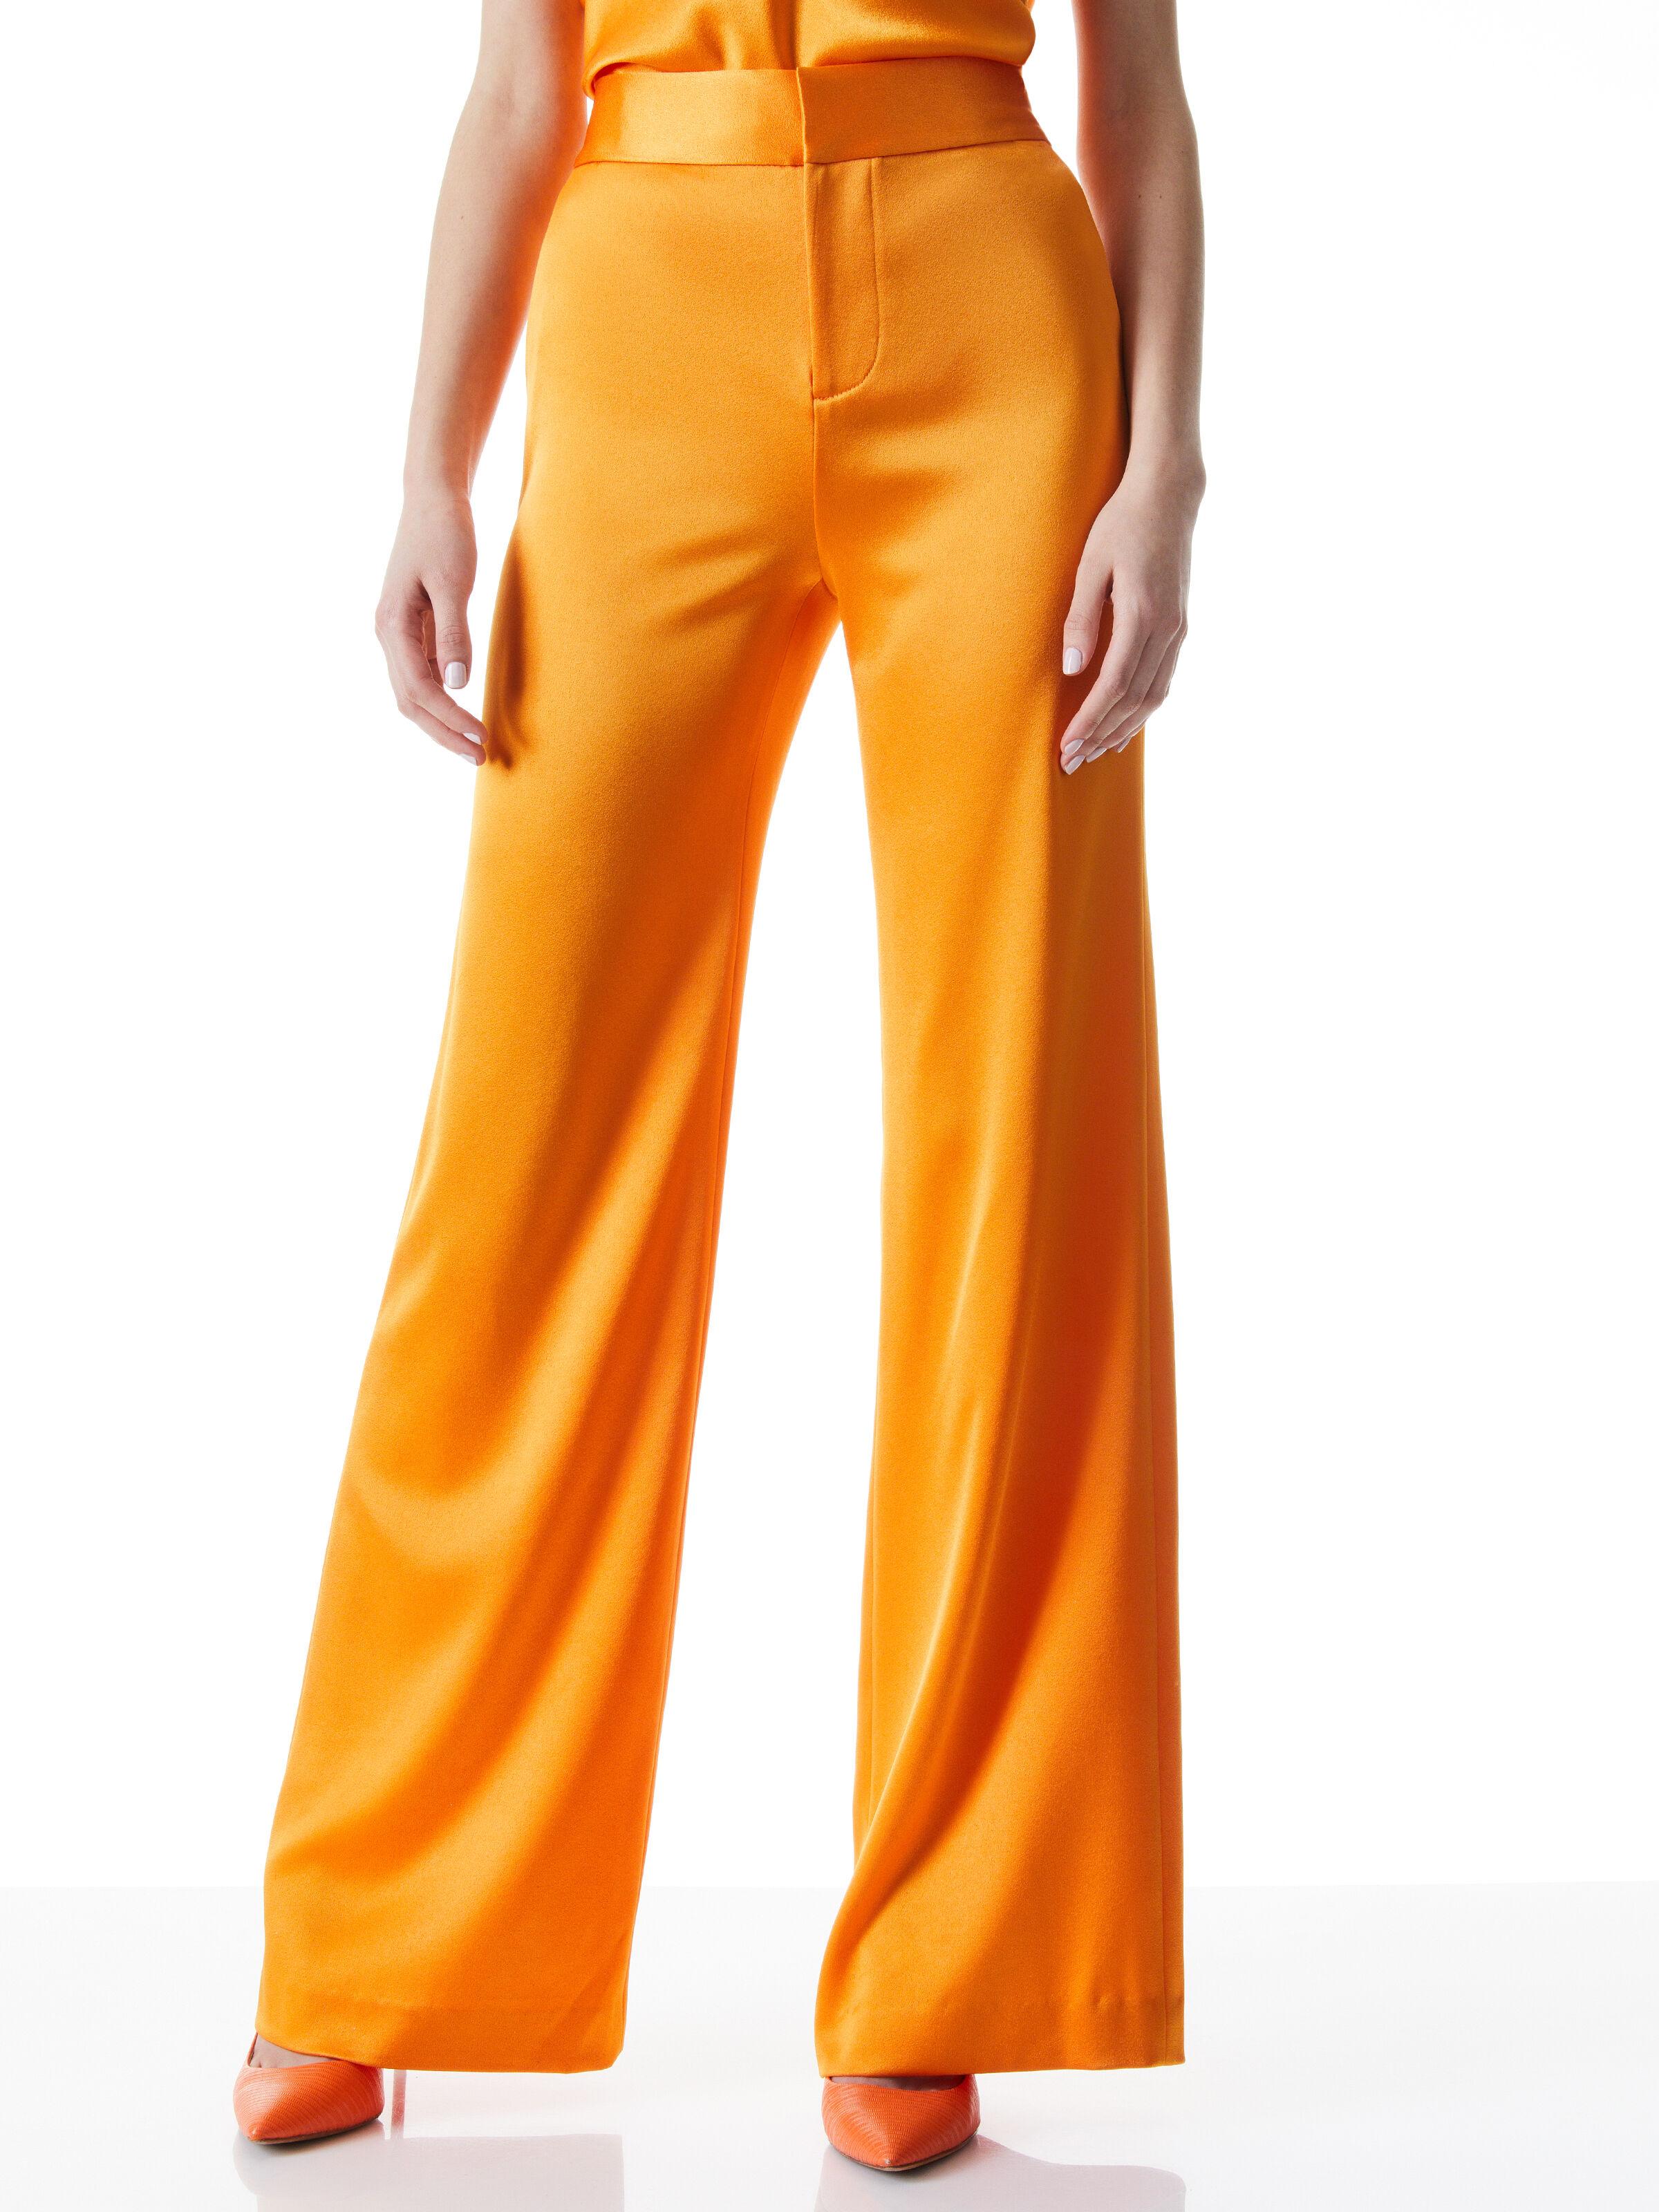 Alice + Olivia Alice + Olivia Deanna High Waisted Bootcut Pant in ...